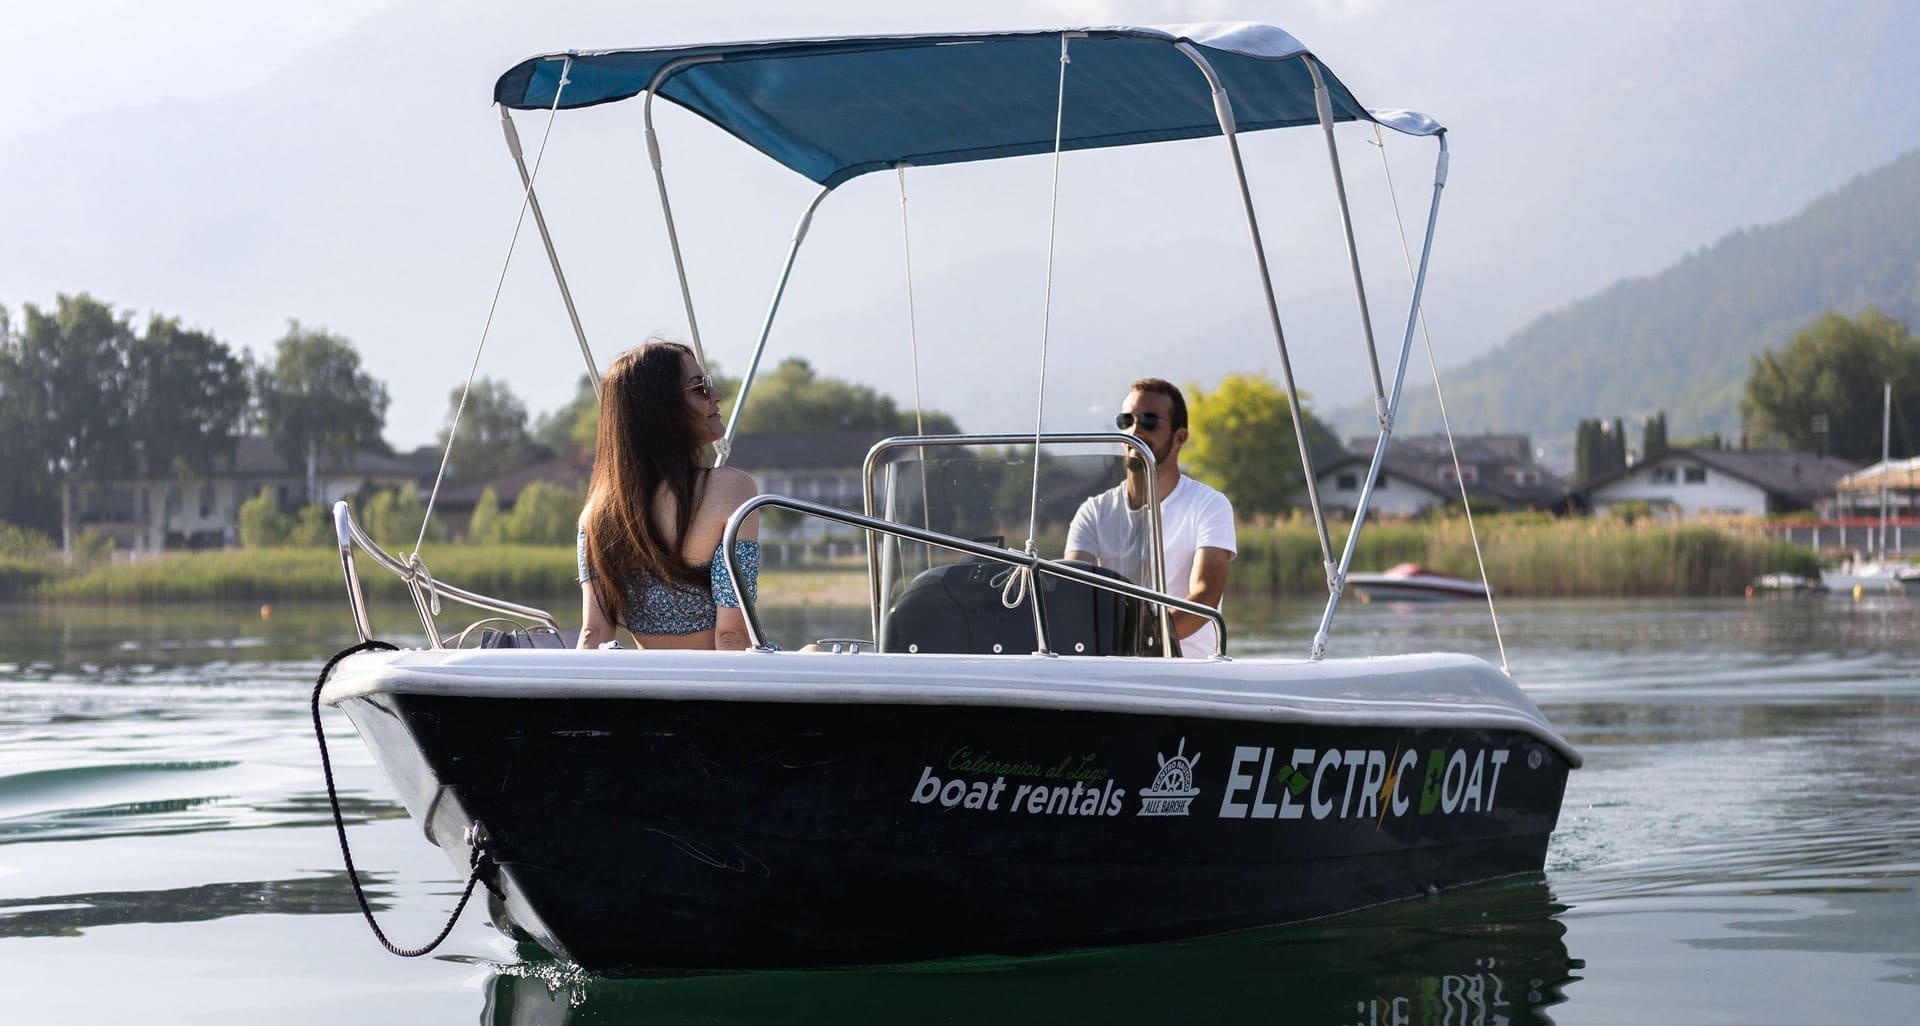 Classic electricboat for 5 people